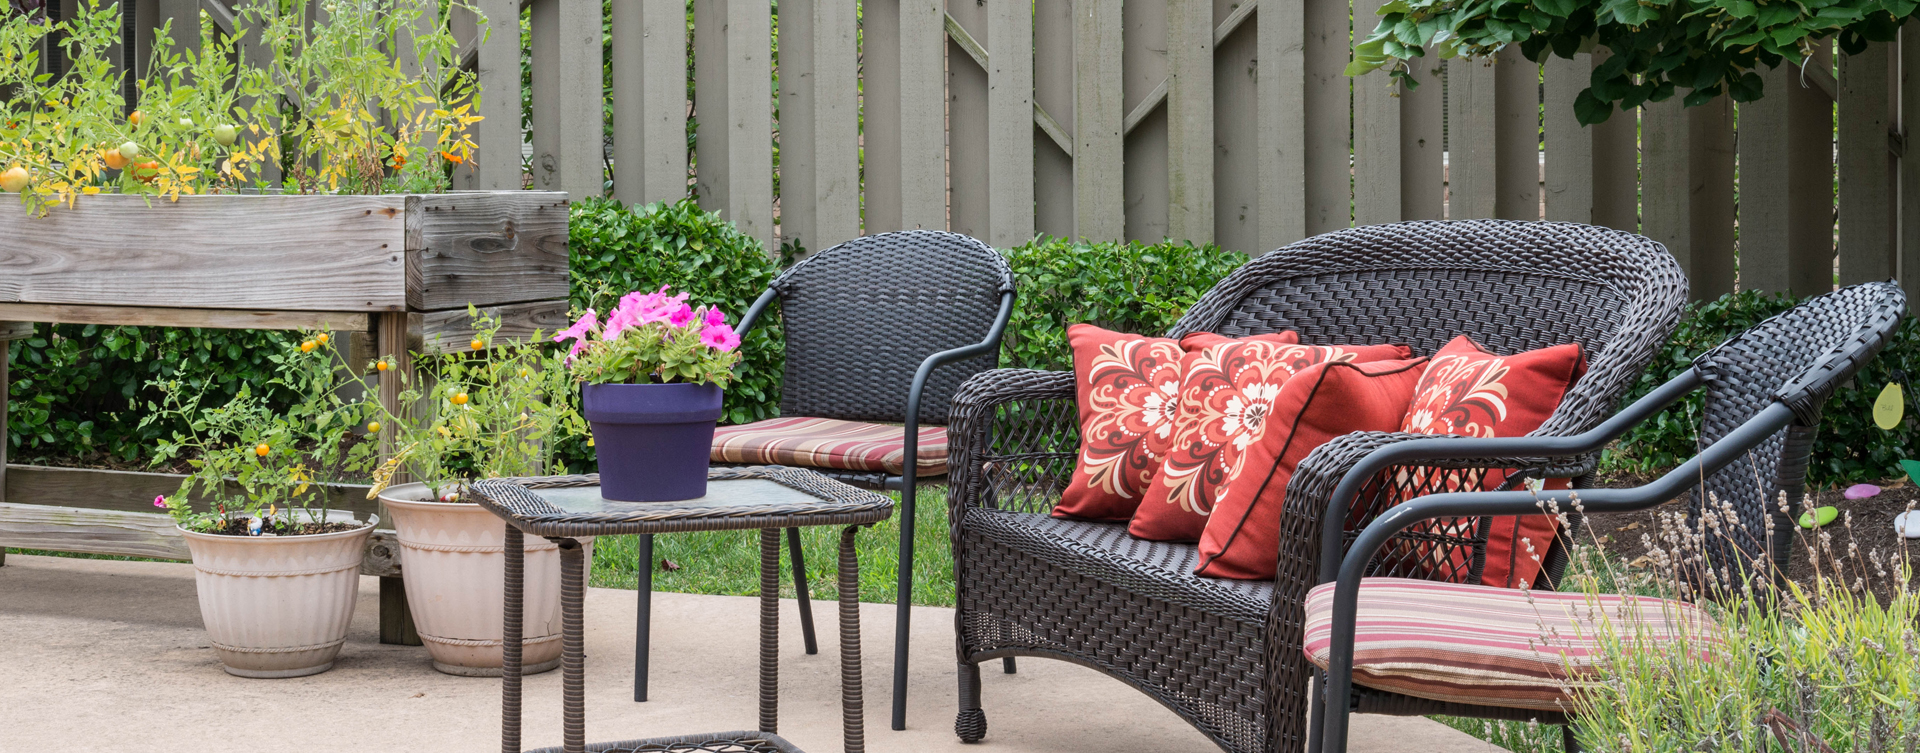 Enjoy bird watching, gardening and barbecuing in our courtyard at Bickford of Middletown